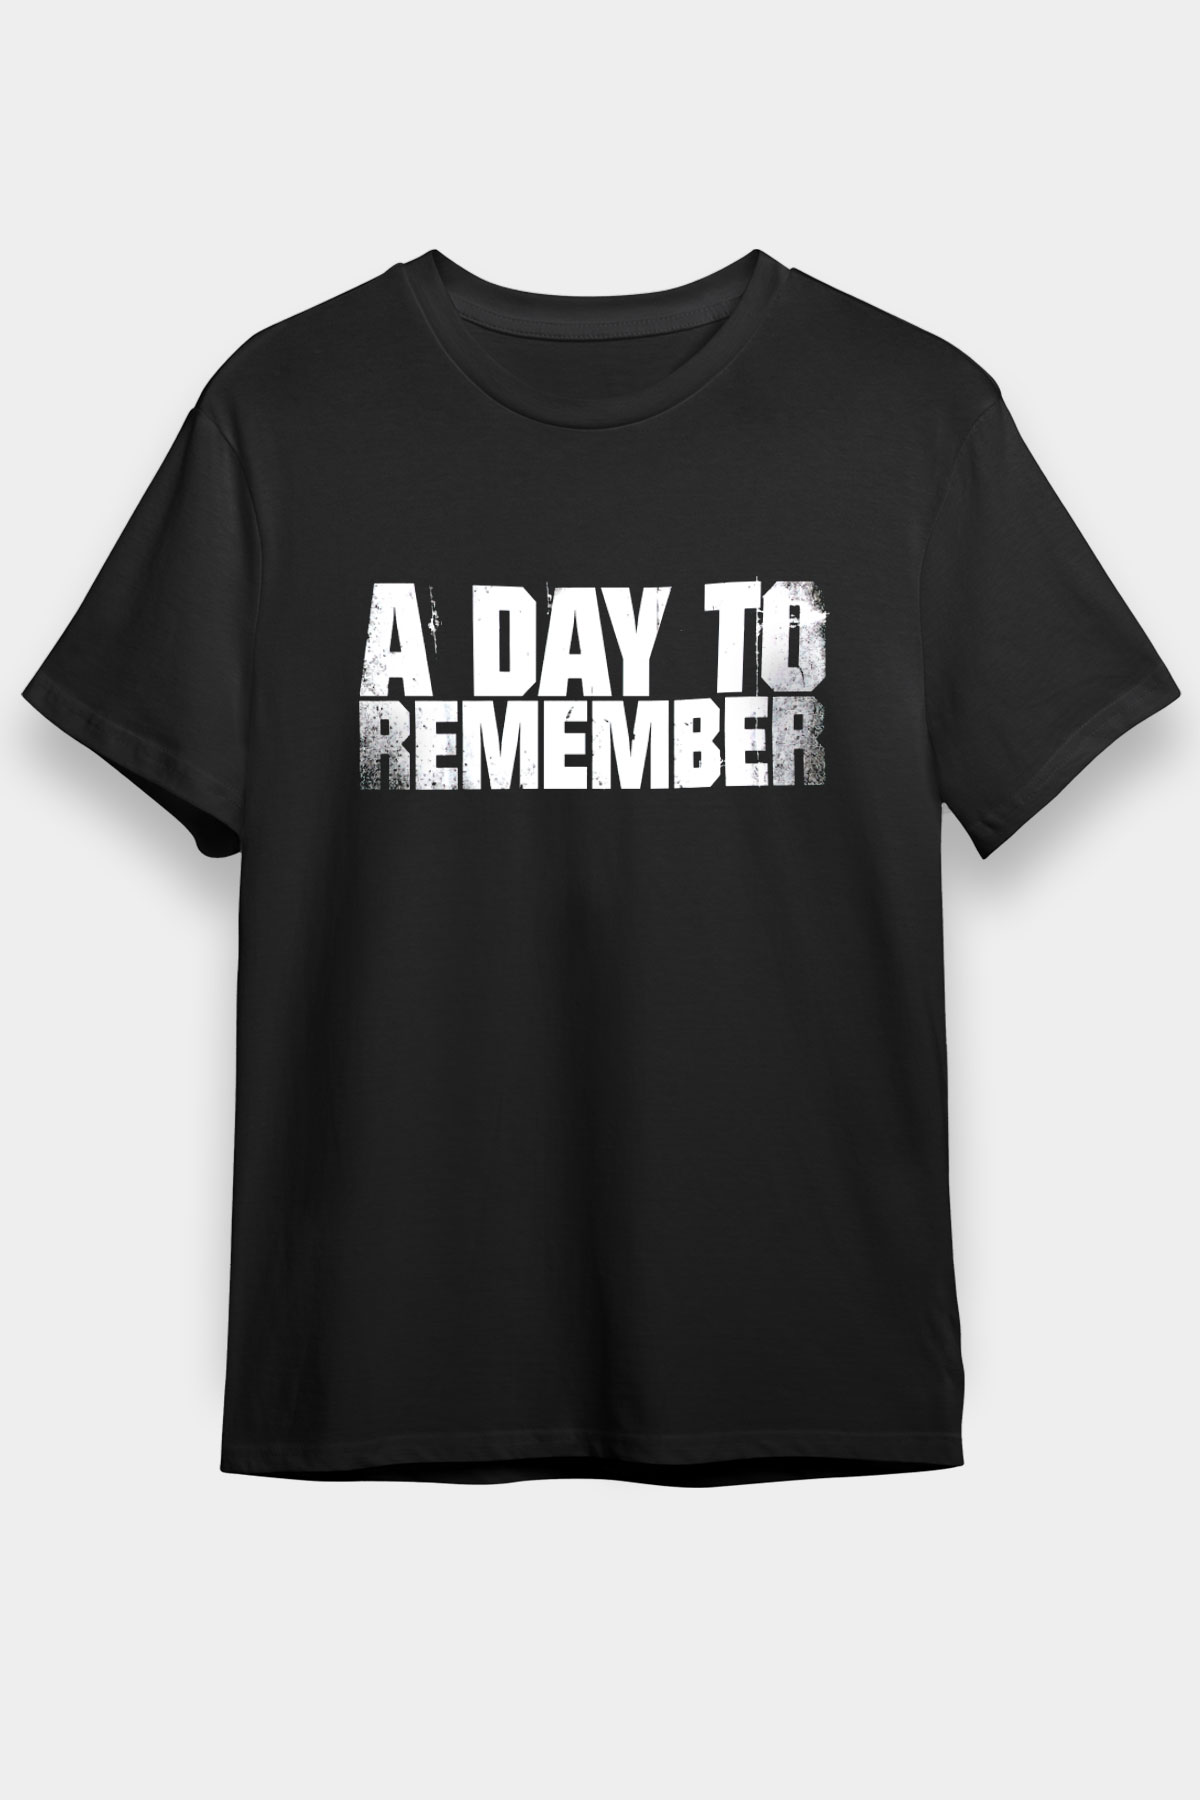 A Day To Remember Black Unisex Tee - STREETWEAR